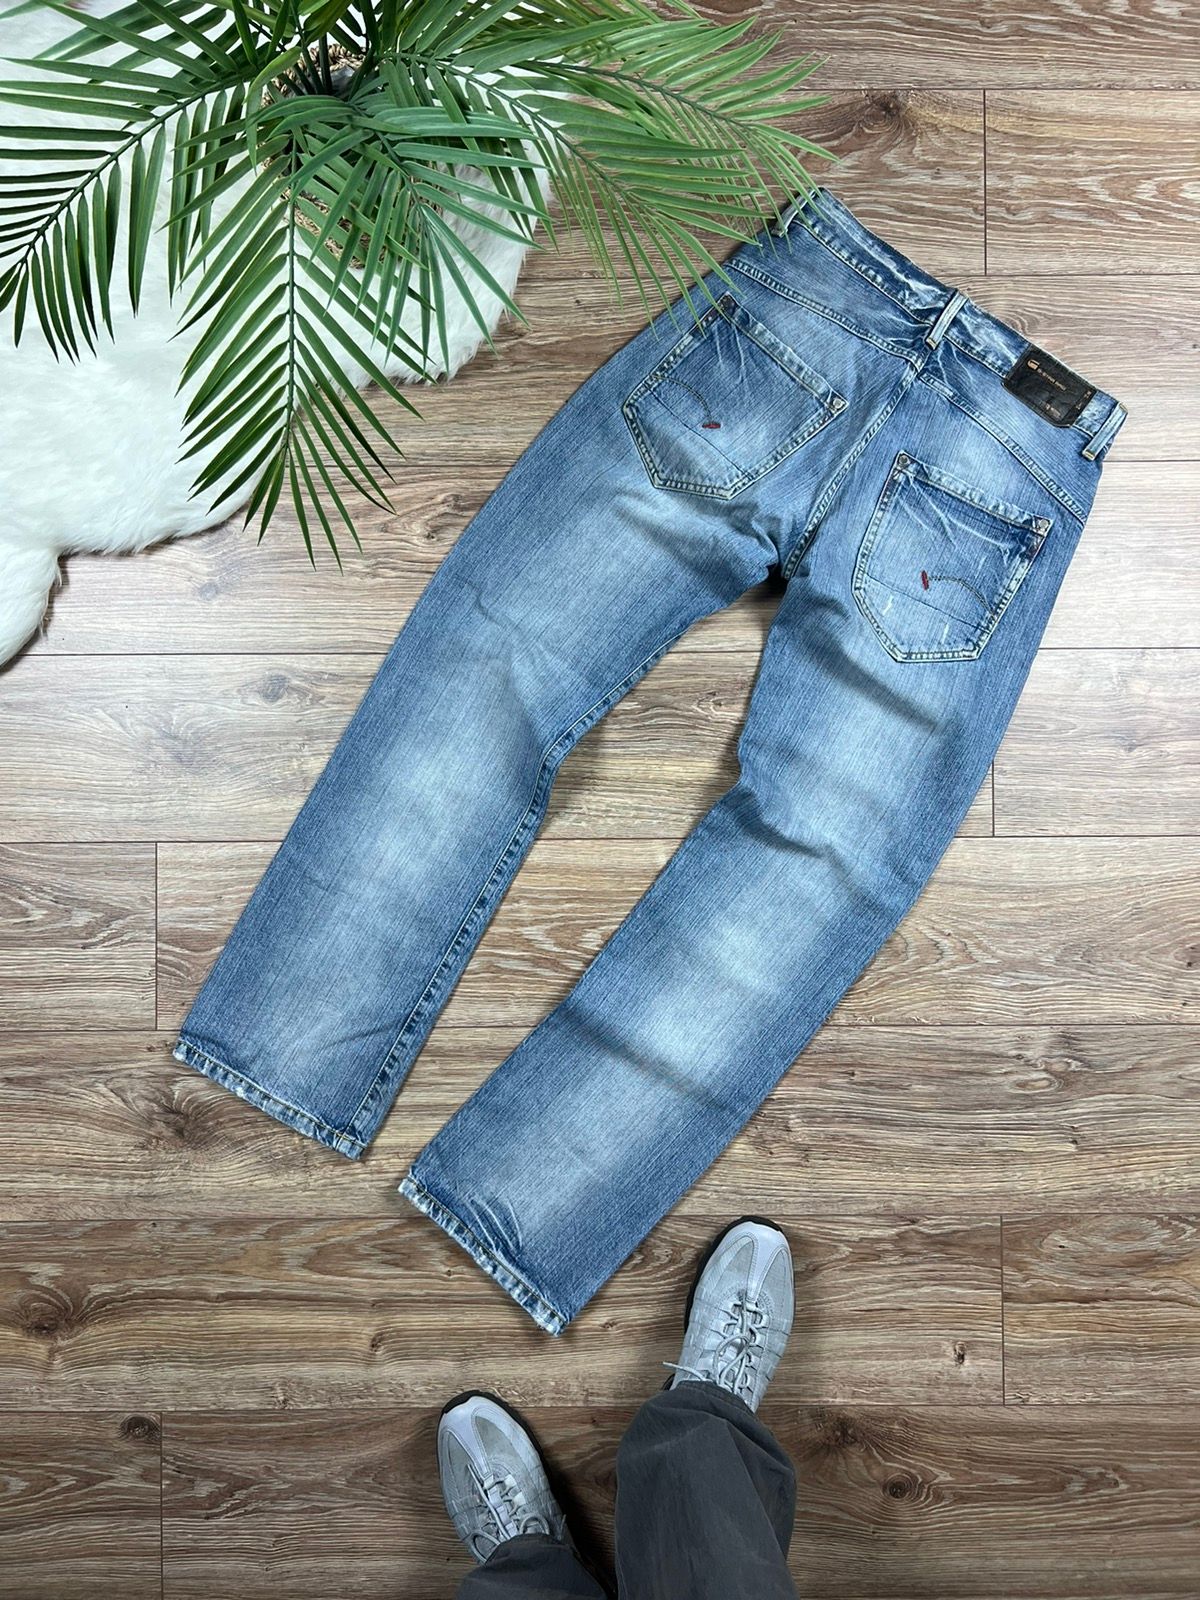 Vintage 💎 90’S G-STAR RAW VINTAGE AVANT GARDE WASHED STRAIGHT JEANS Size US 31 - 1 Preview